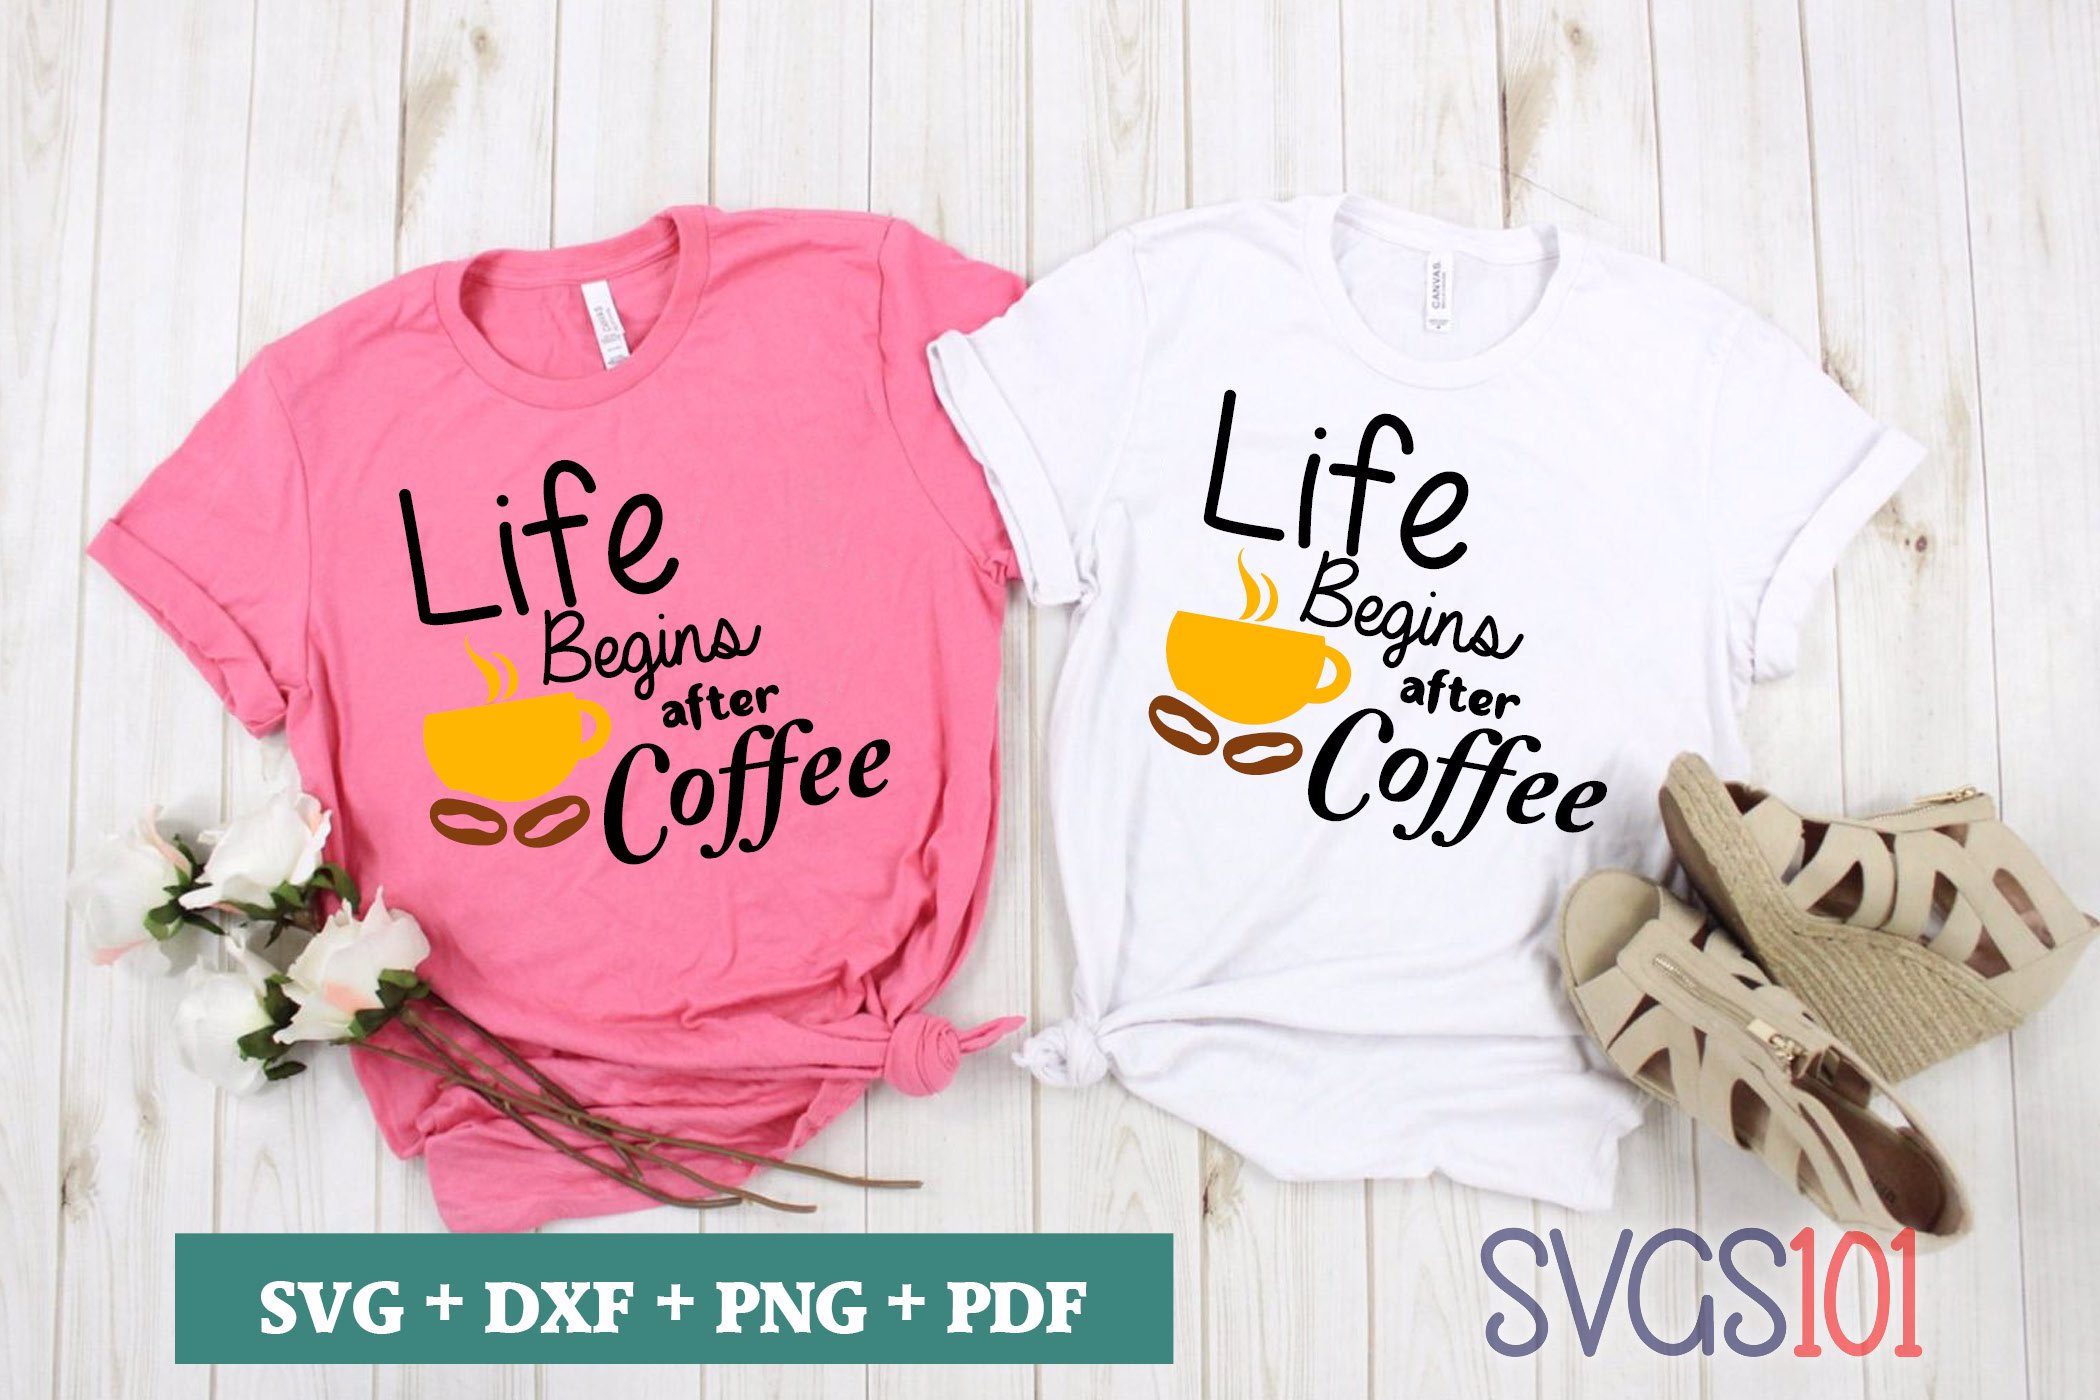 Life Begins After Coffee Svg Cuttable File Dxf Eps Png Pdf Svg Cutting File